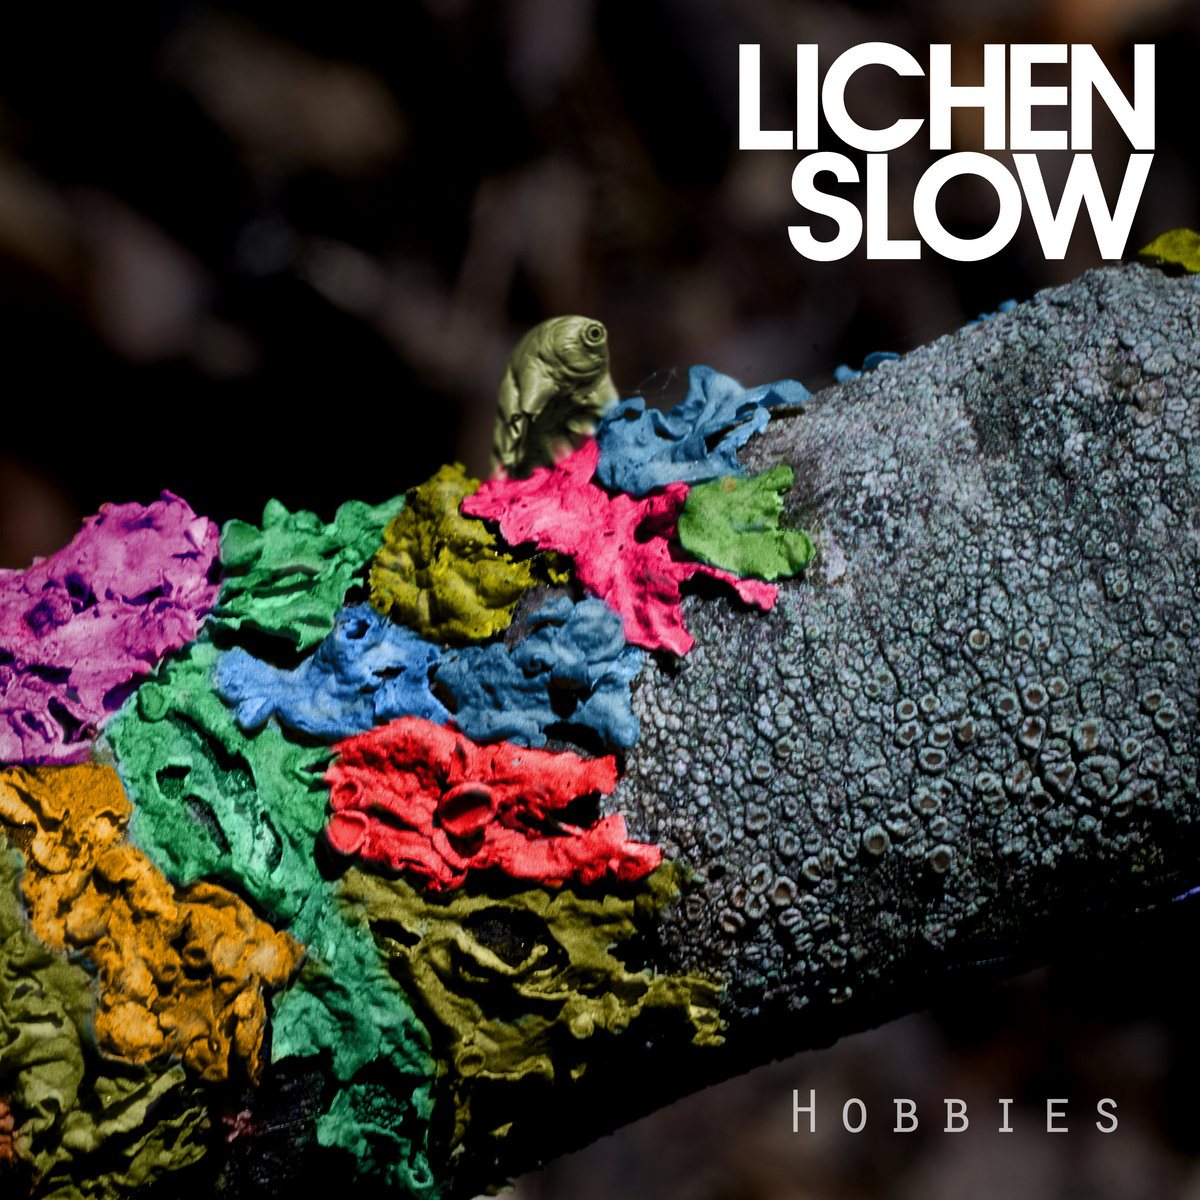 Next from 1994 - 7 Seconds – Youssou N’Dour, Neneh Cherry Then followed by from last year Lichen Slow from their terrific LP Rest Lurks and the track Hobbies @LichenSlow radiofreematlock.co.uk